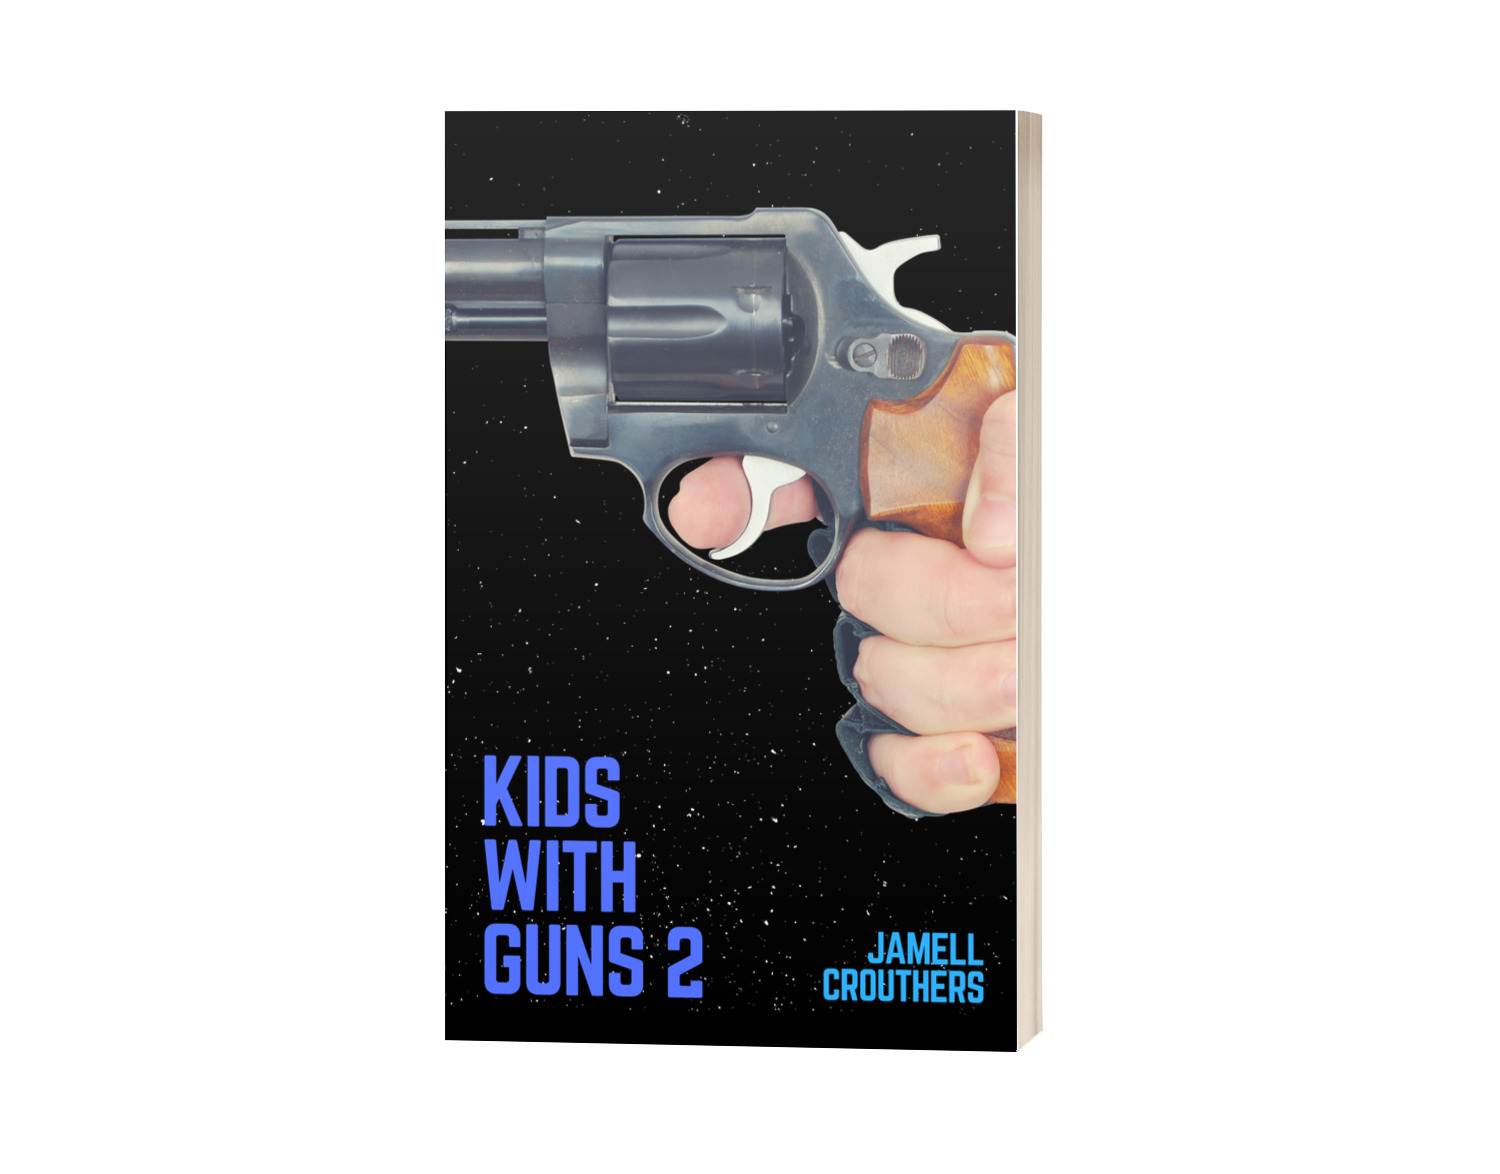 Kids With Guns Part 2 focuses on the aftermath of a school shooting and how a community comes together during tumultuous times. 